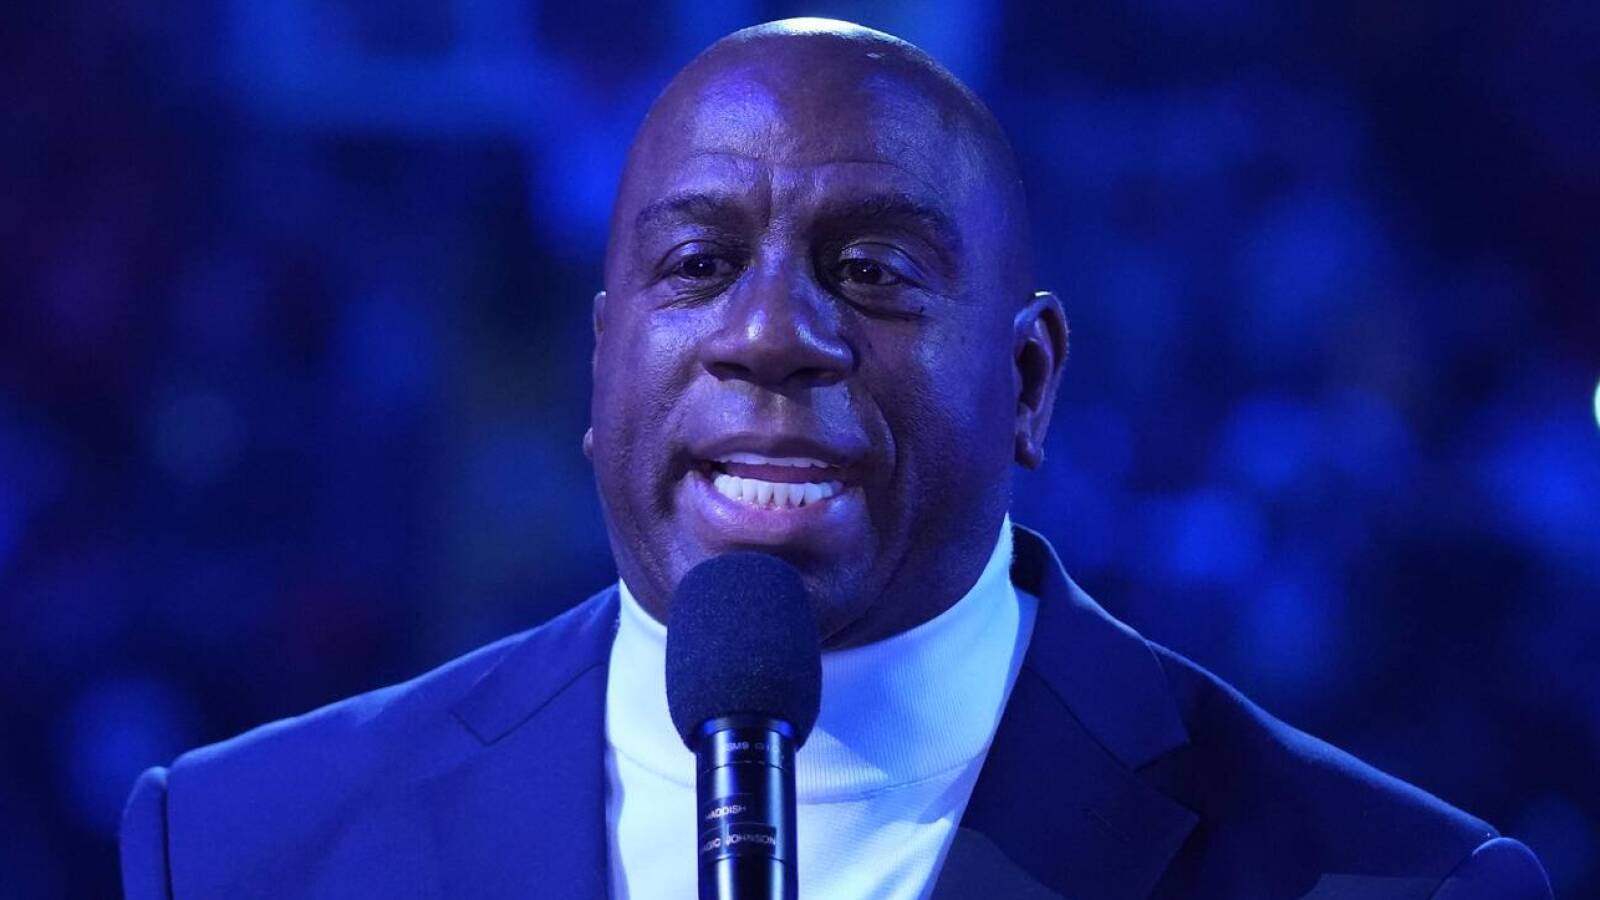 Magic Johnson changes tune on Russell Westbrook amid social media drama